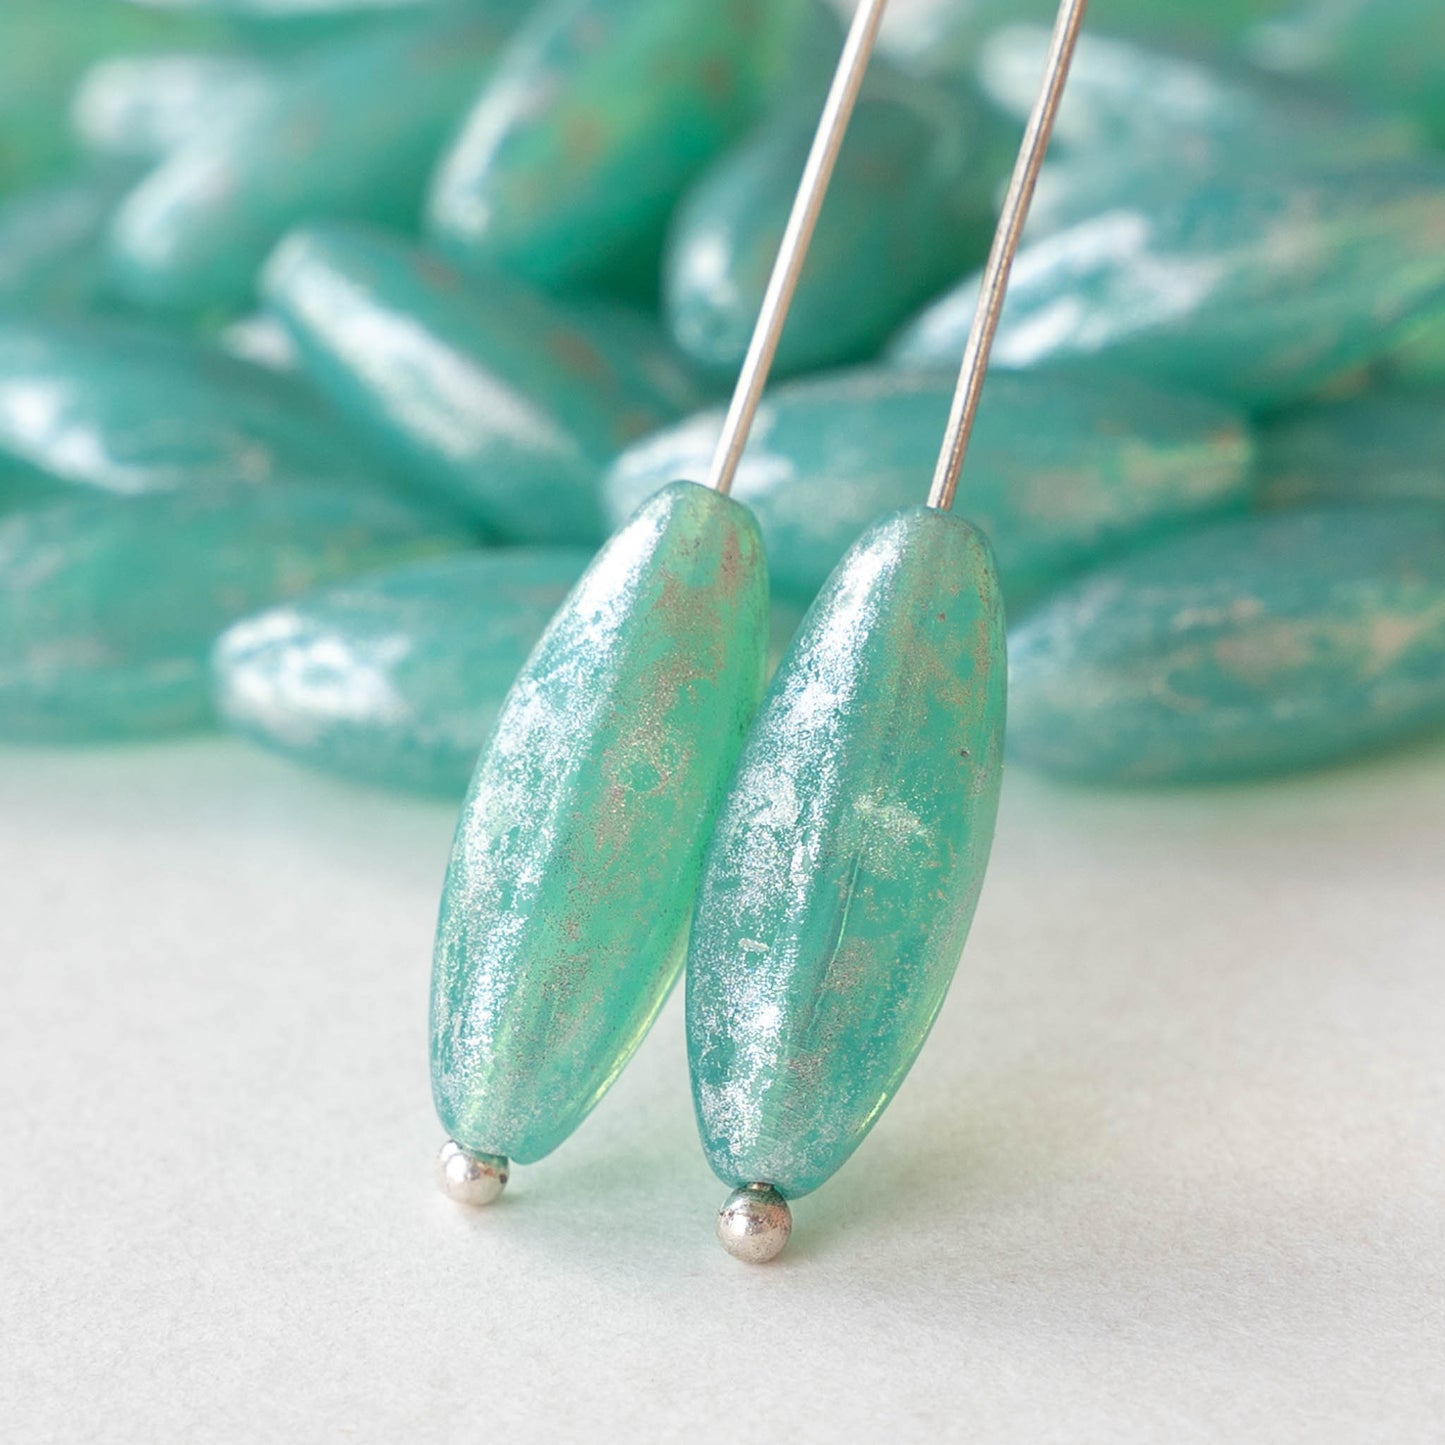 6mm Glass Beads - Seafoam Green & White with Copper Wash - 50 or 100 –  funkyprettybeads